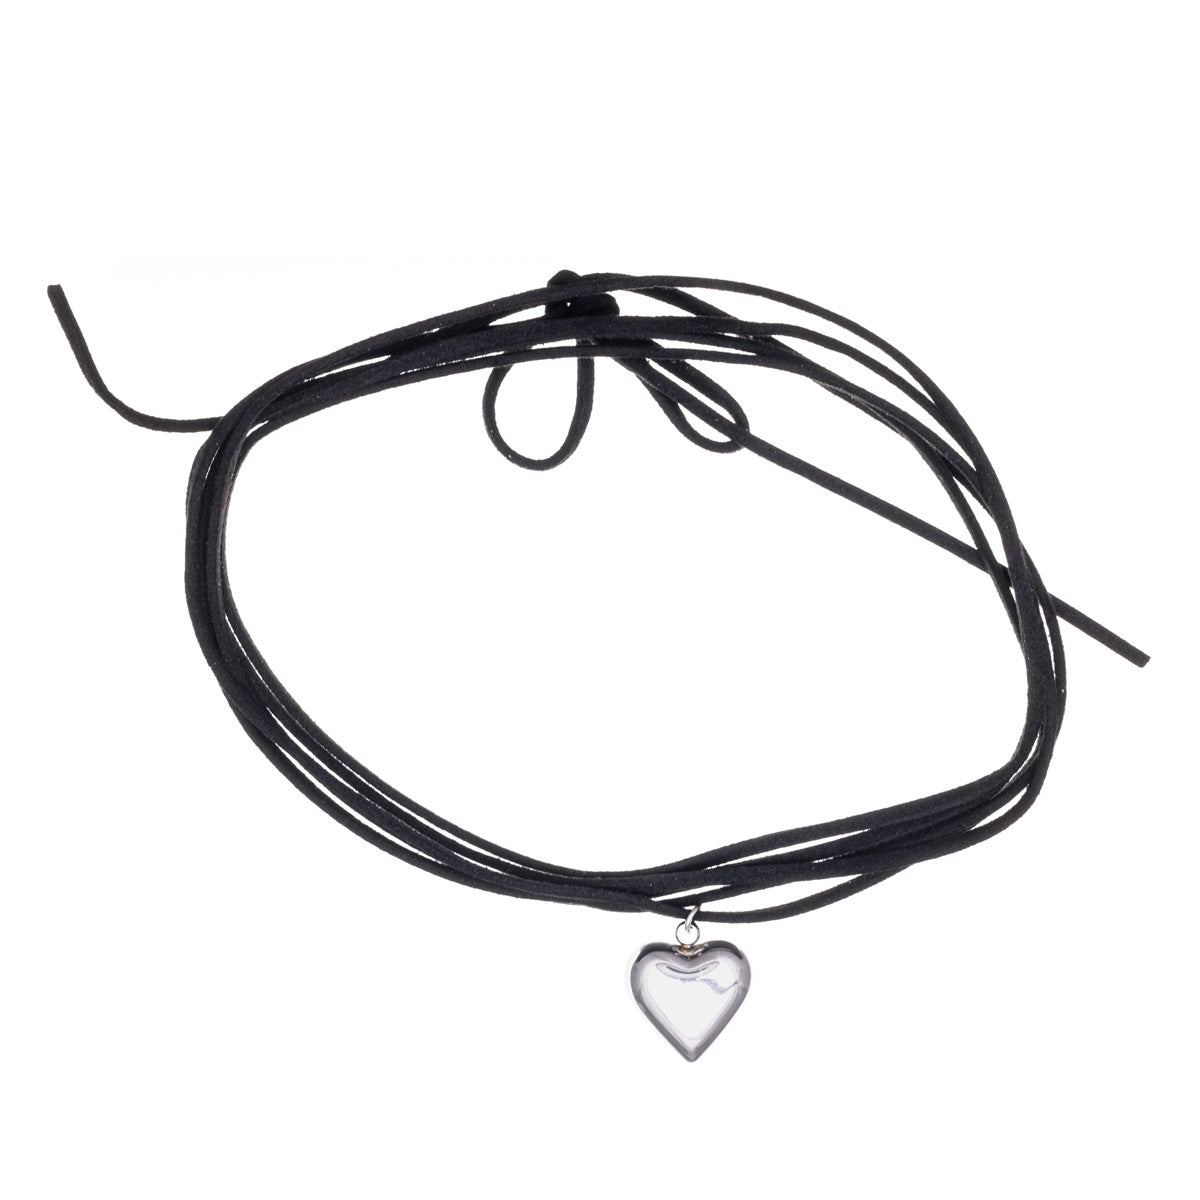 Choker necklace with heart pendant (Steel 316L)